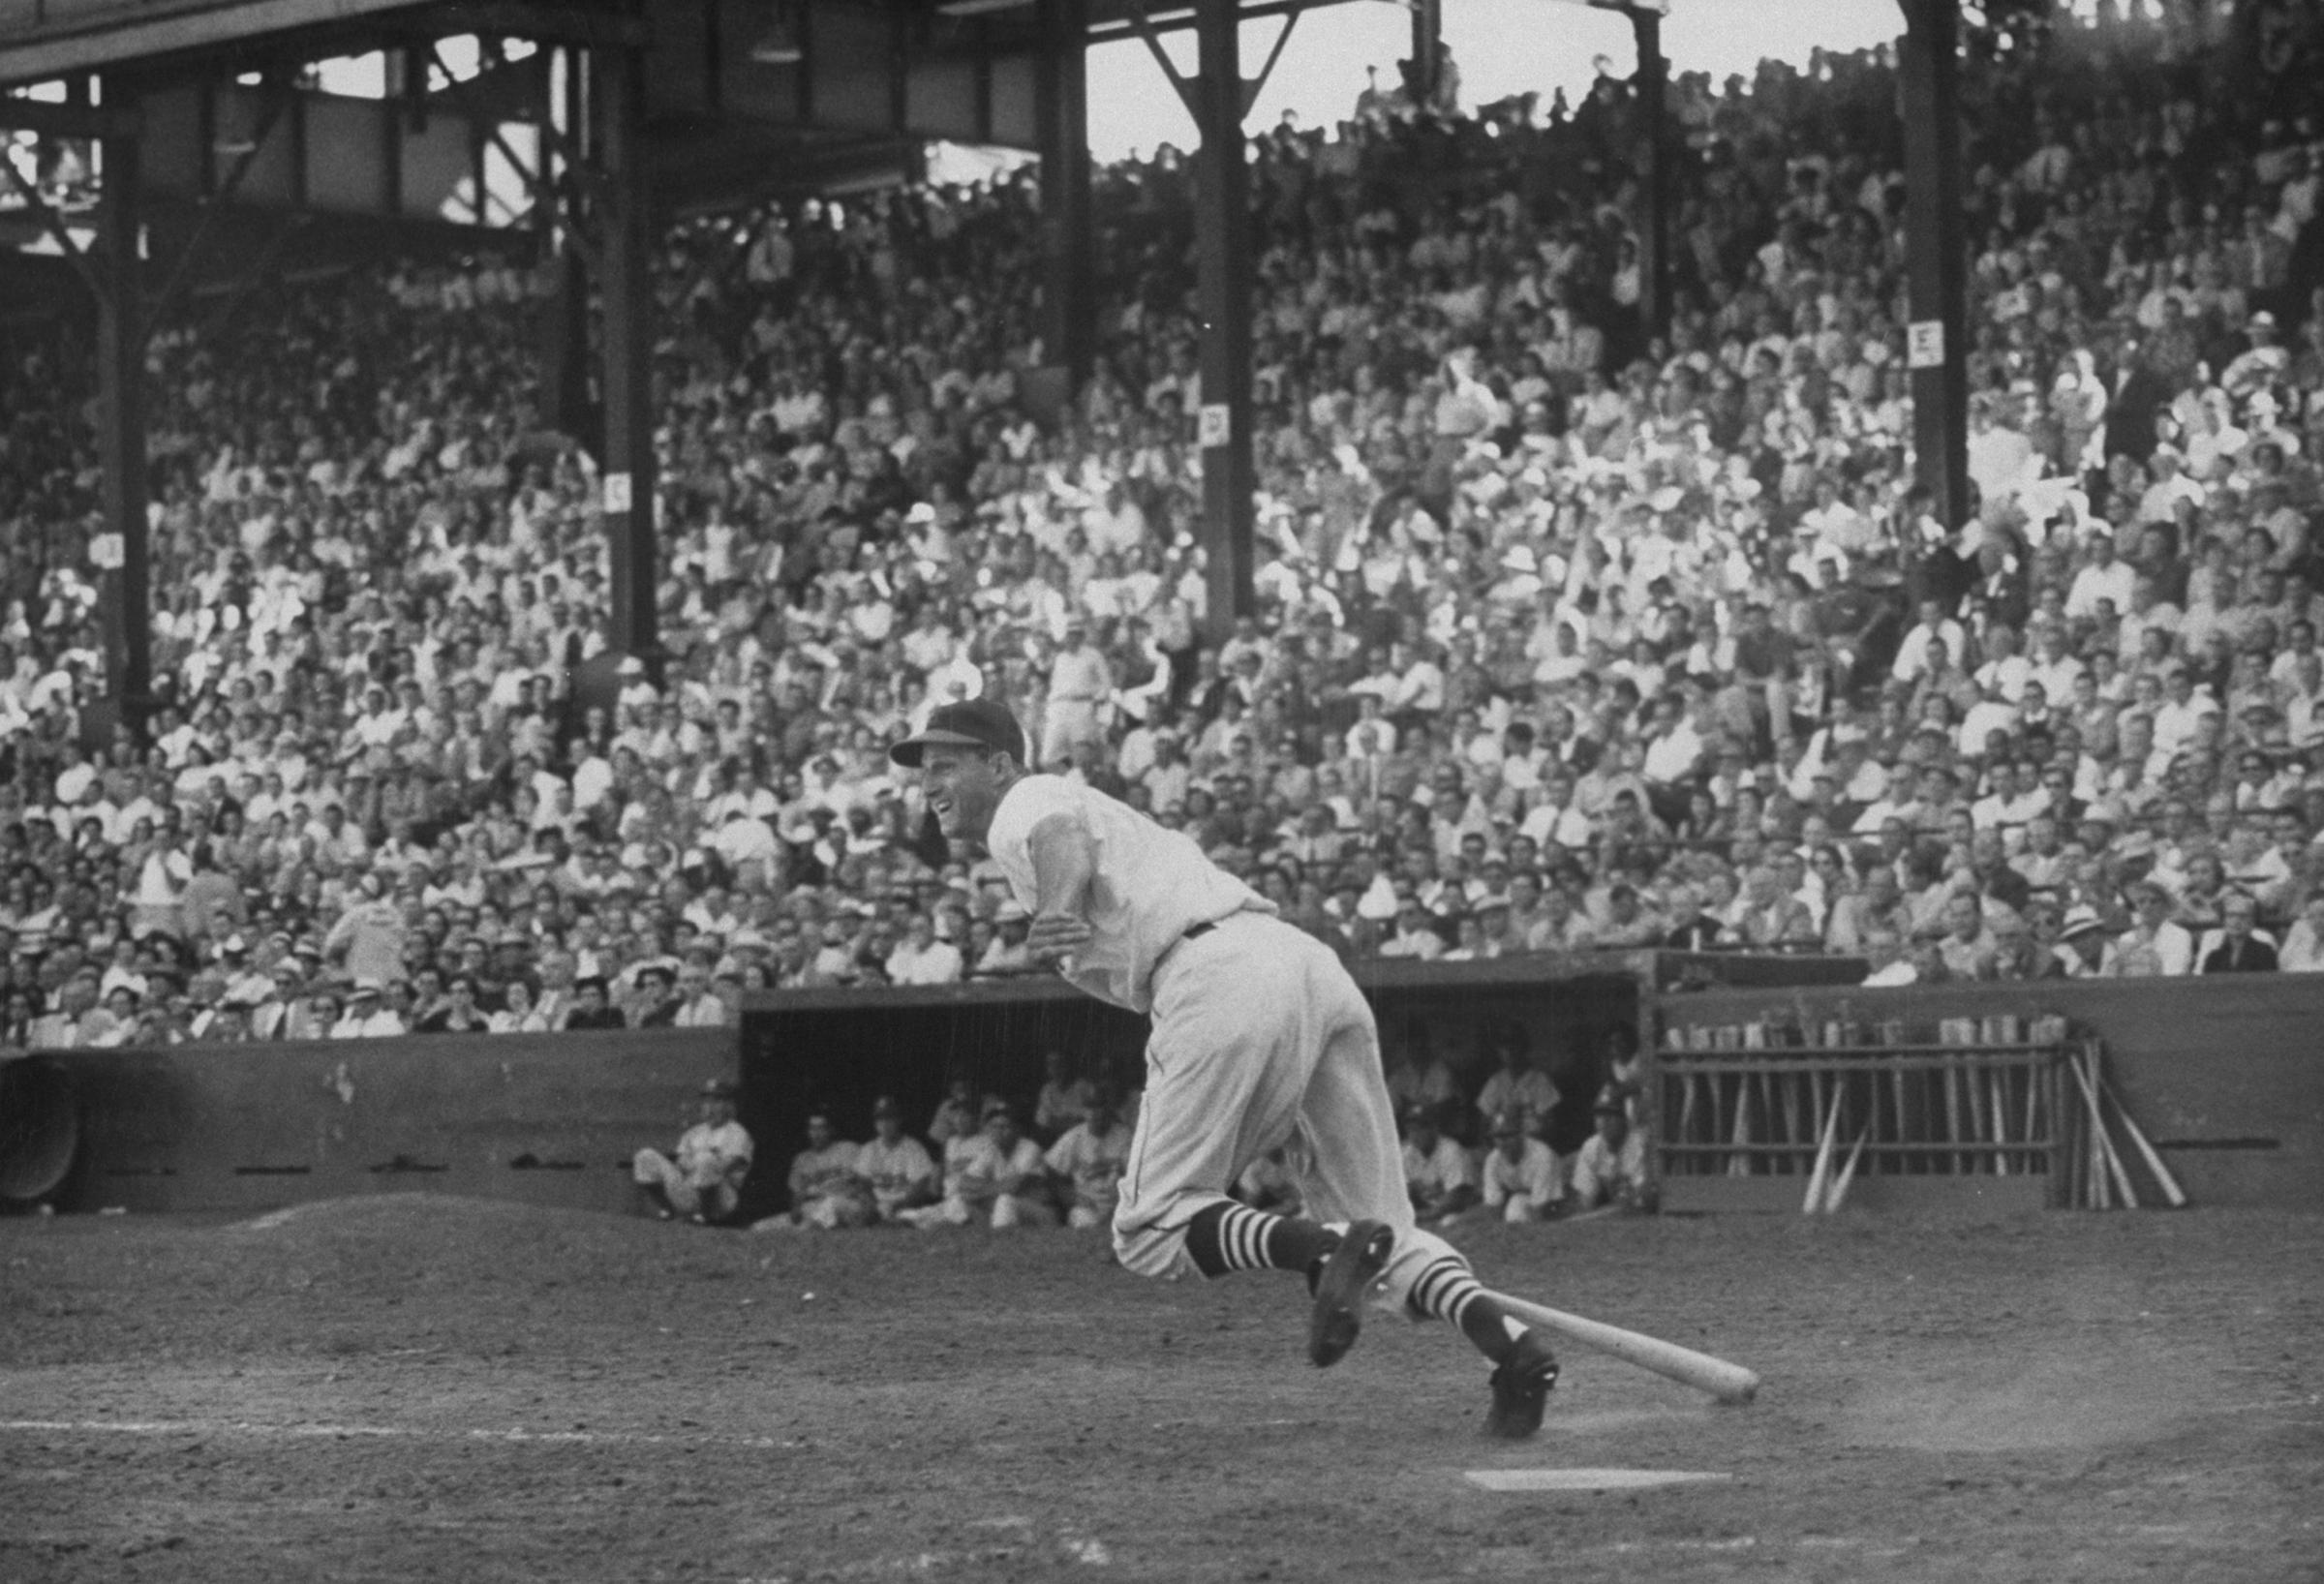 After slapping a hit to center, Stan Musial dashes toward first, 1952.